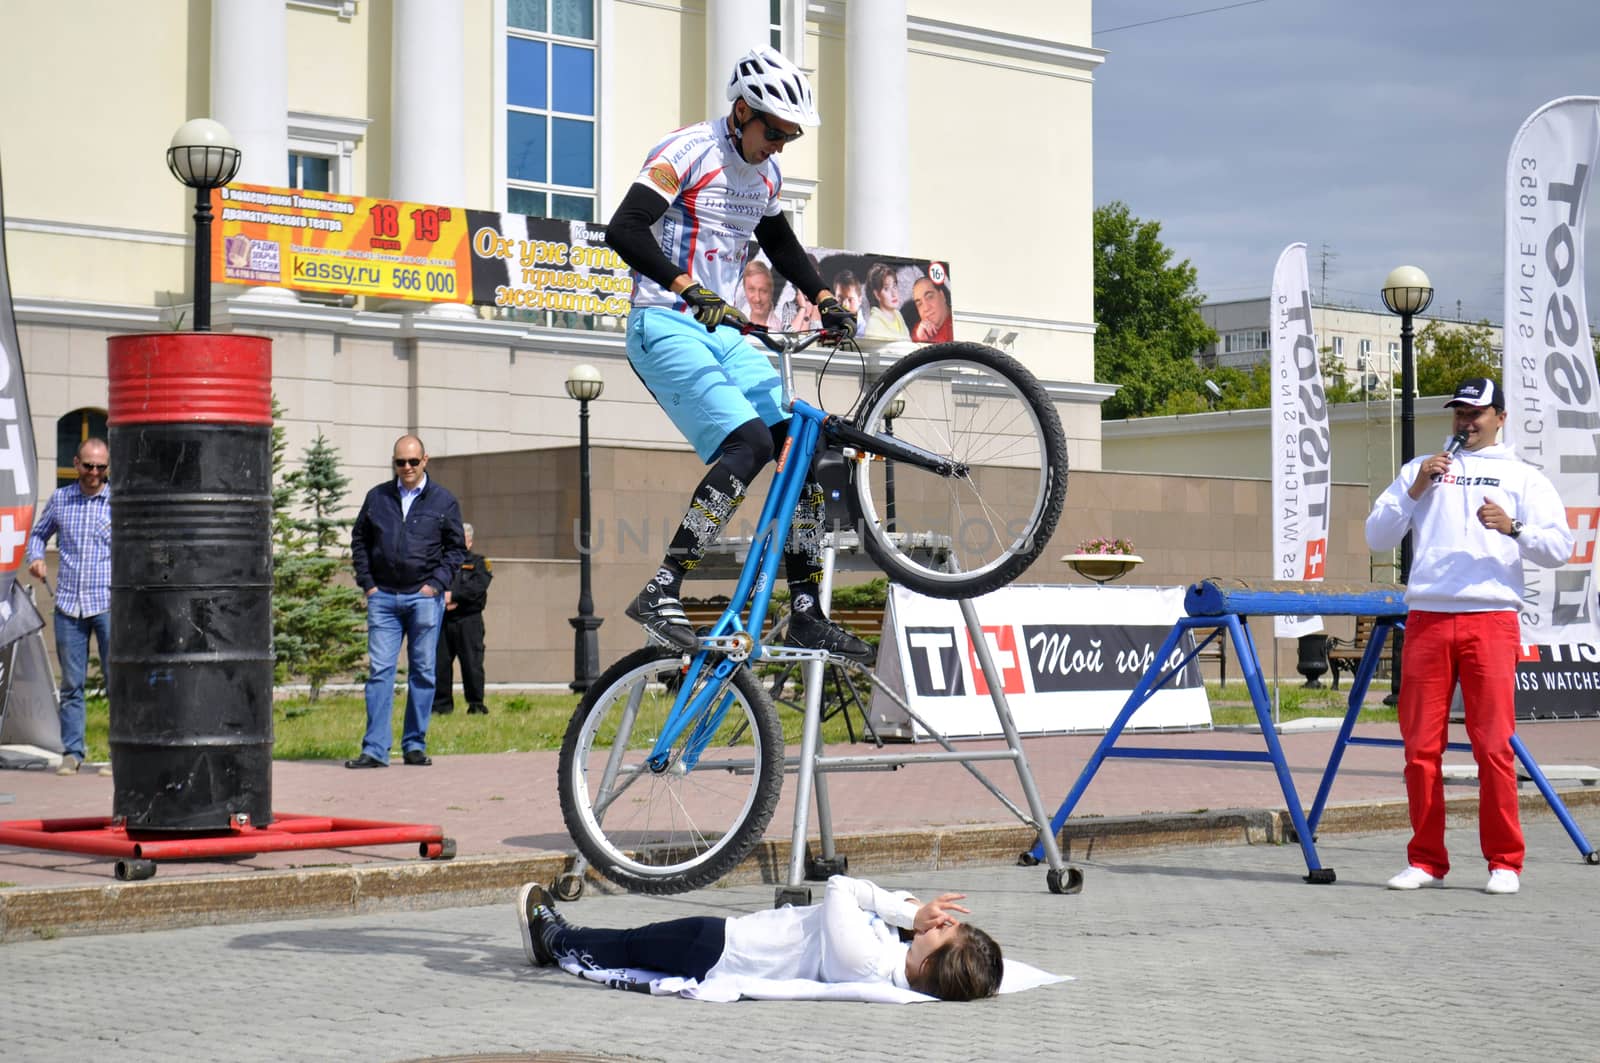 Mikhail Sukhanov performance, champions of Russia on a cycle tri by veronka72